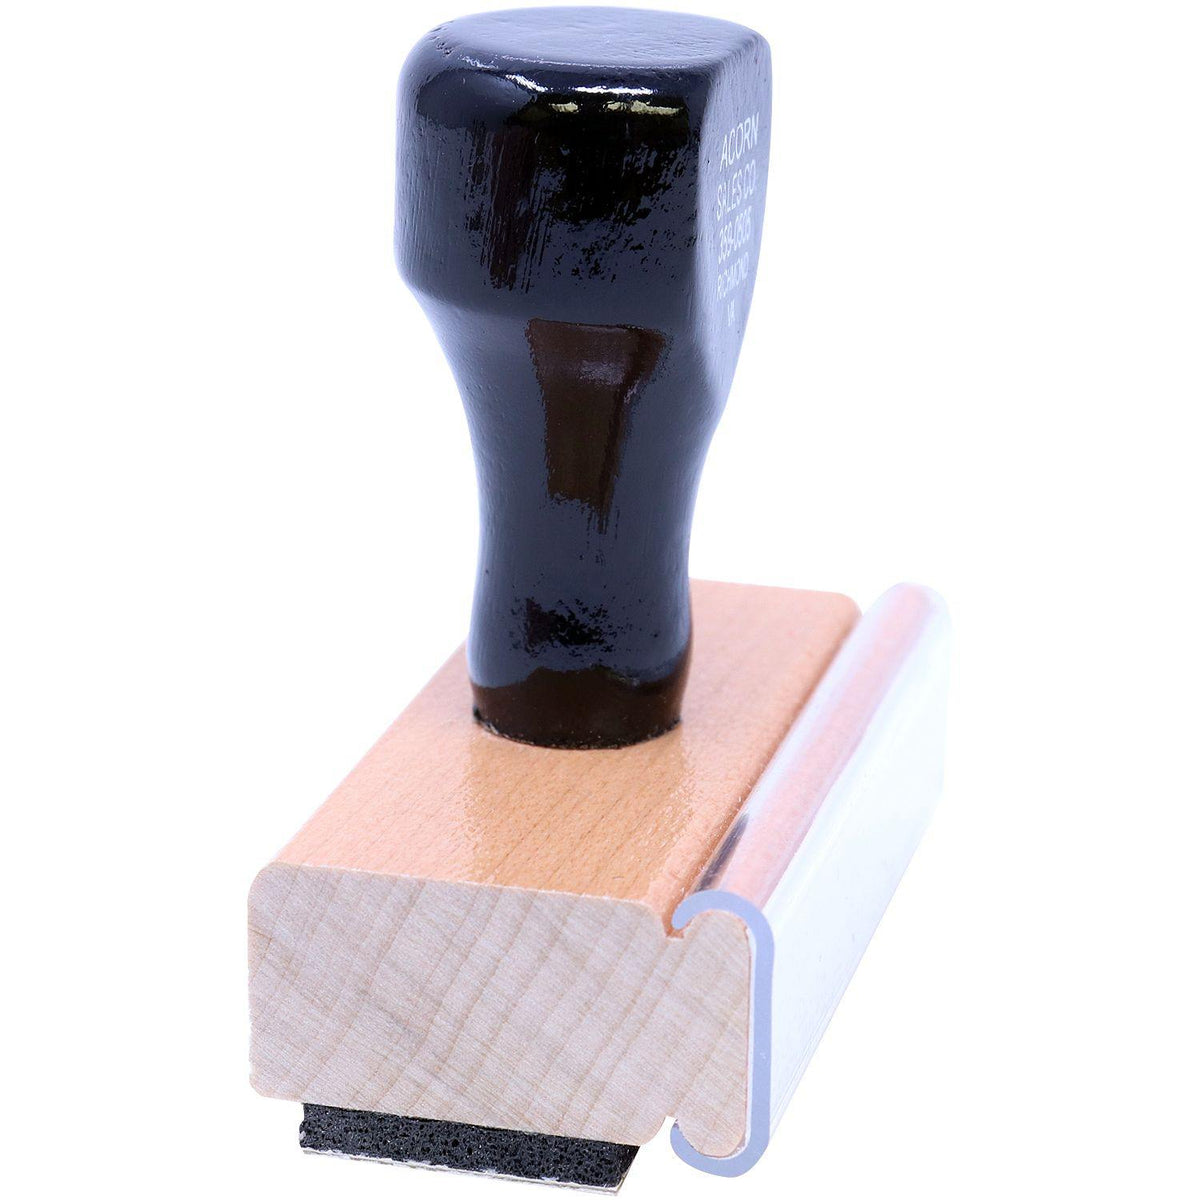 Side View of Large Recibido Rubber Stamp at an Angle